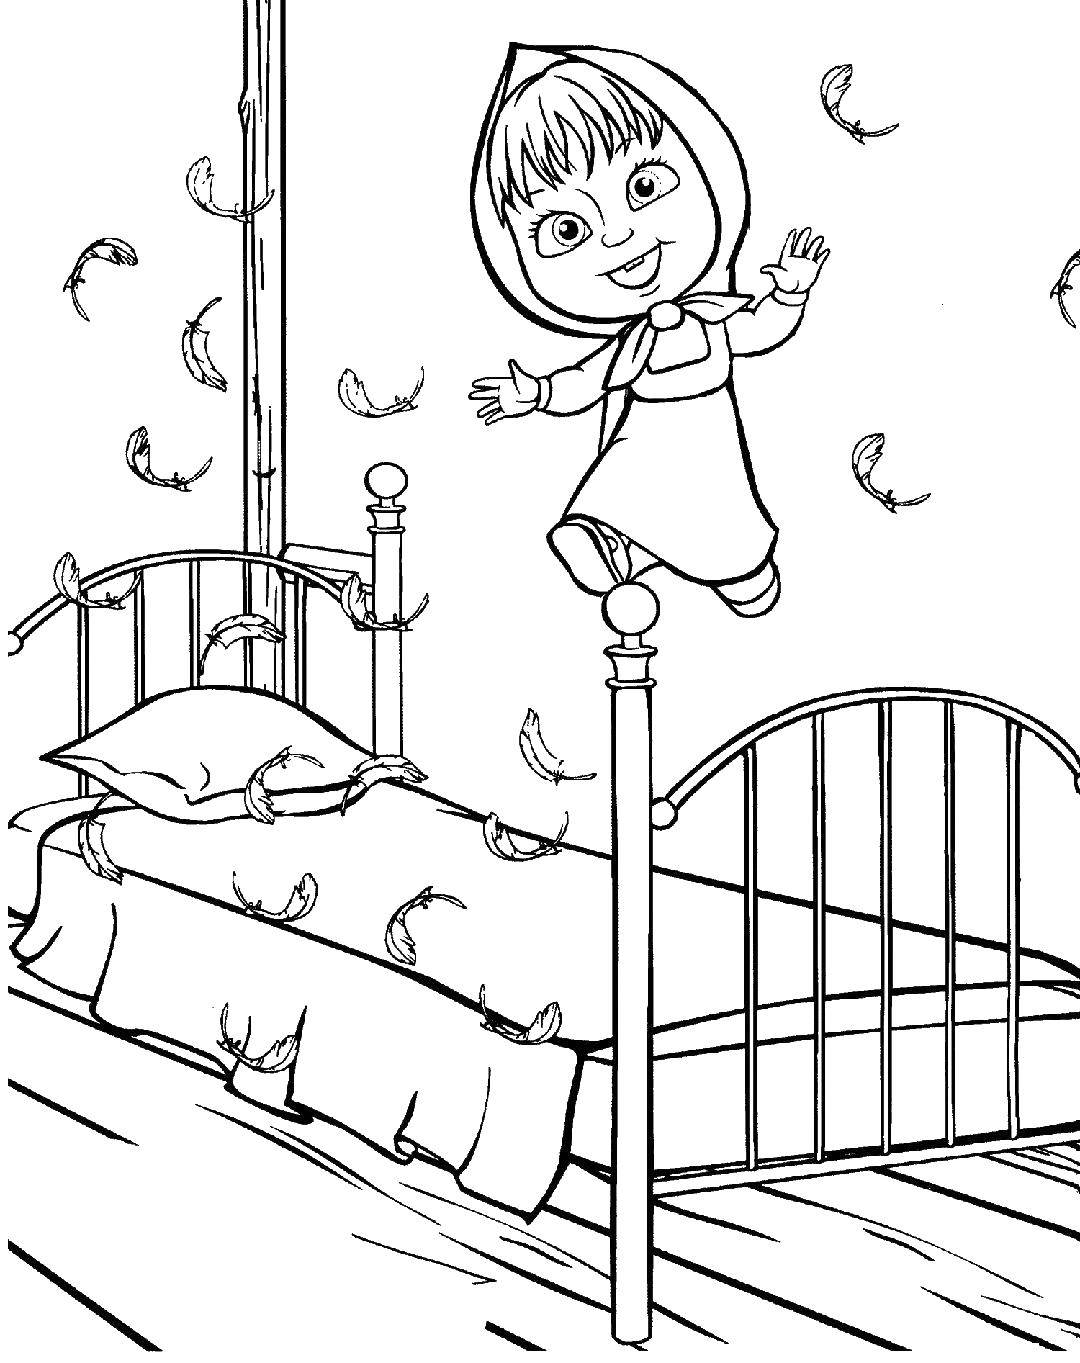 Coloring Masha jumping on the bed. Category The bed. Tags:  the bed, Mary, tale.